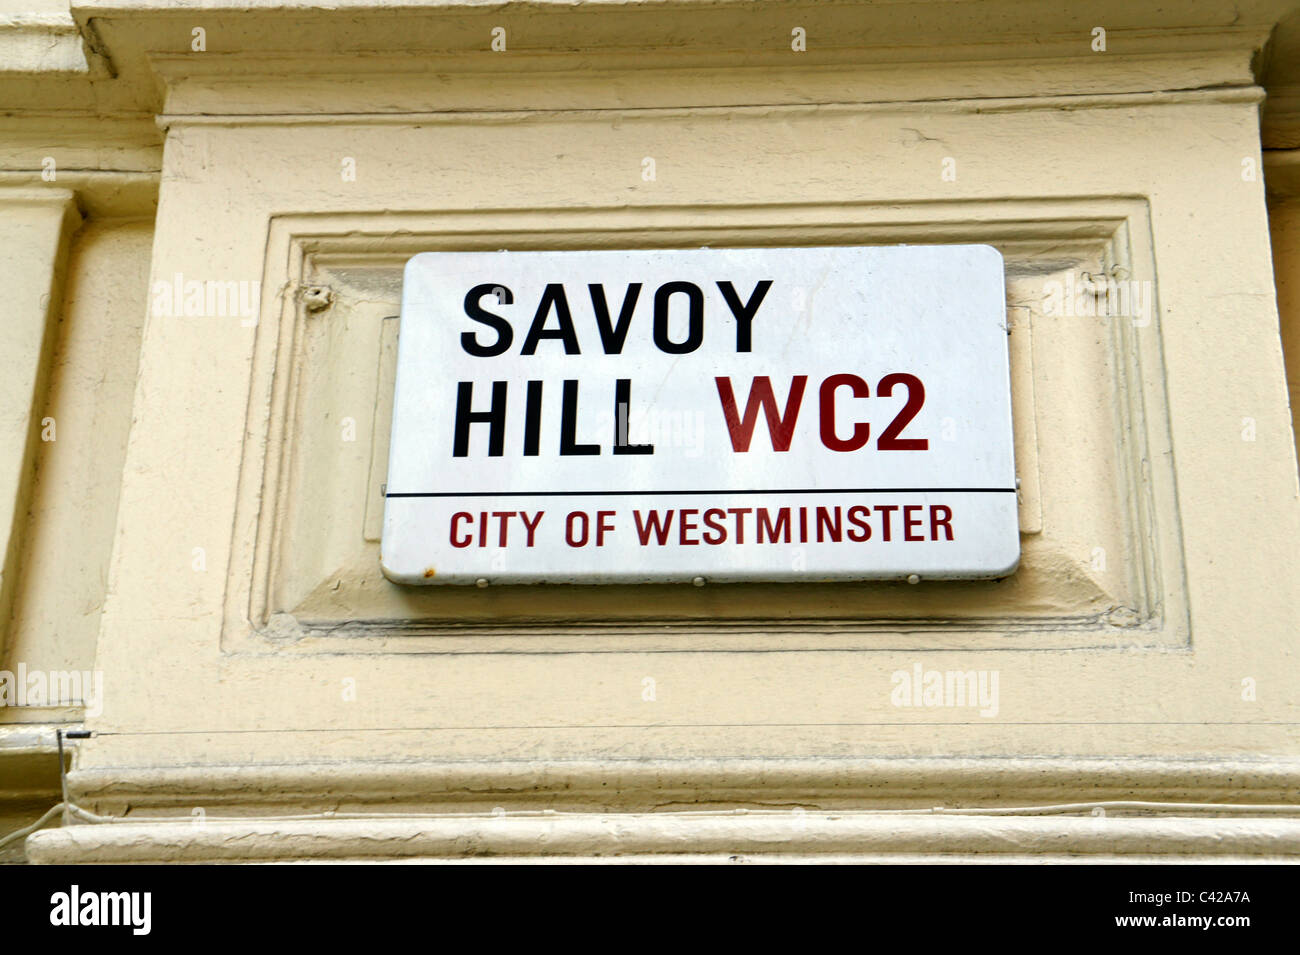 Savoy Hill WC2 City of Westminster road sign Stock Photo